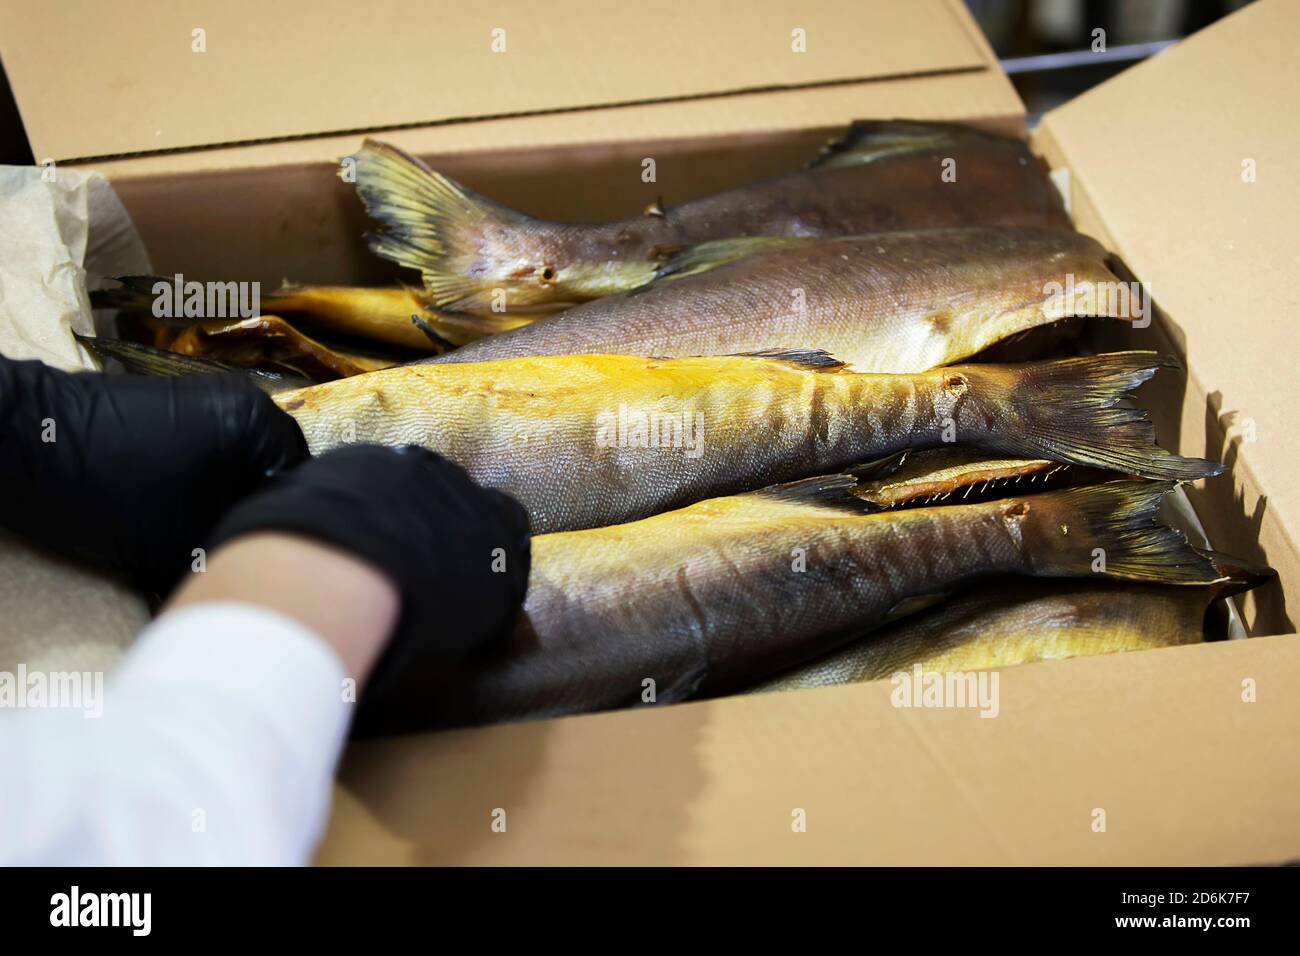 Smoked mackerel in a paper box. Fishing industry. Stock Photo